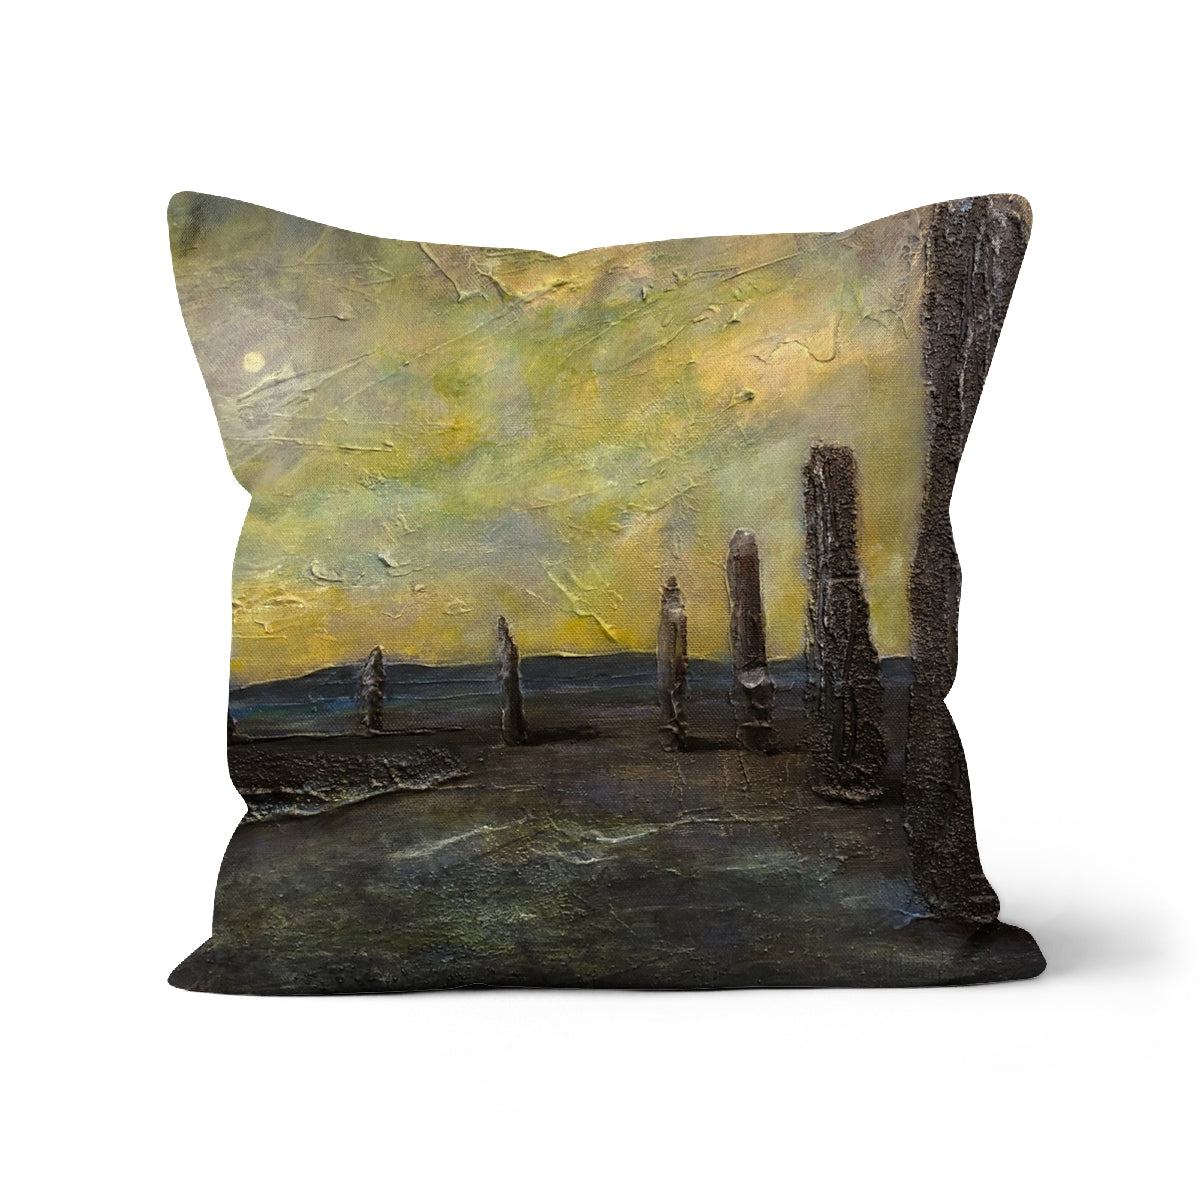 An Ethereal Ring Of Brodgar Art Gifts Cushion-Cushions-Orkney Art Gallery-Faux Suede-16"x16"-Paintings, Prints, Homeware, Art Gifts From Scotland By Scottish Artist Kevin Hunter